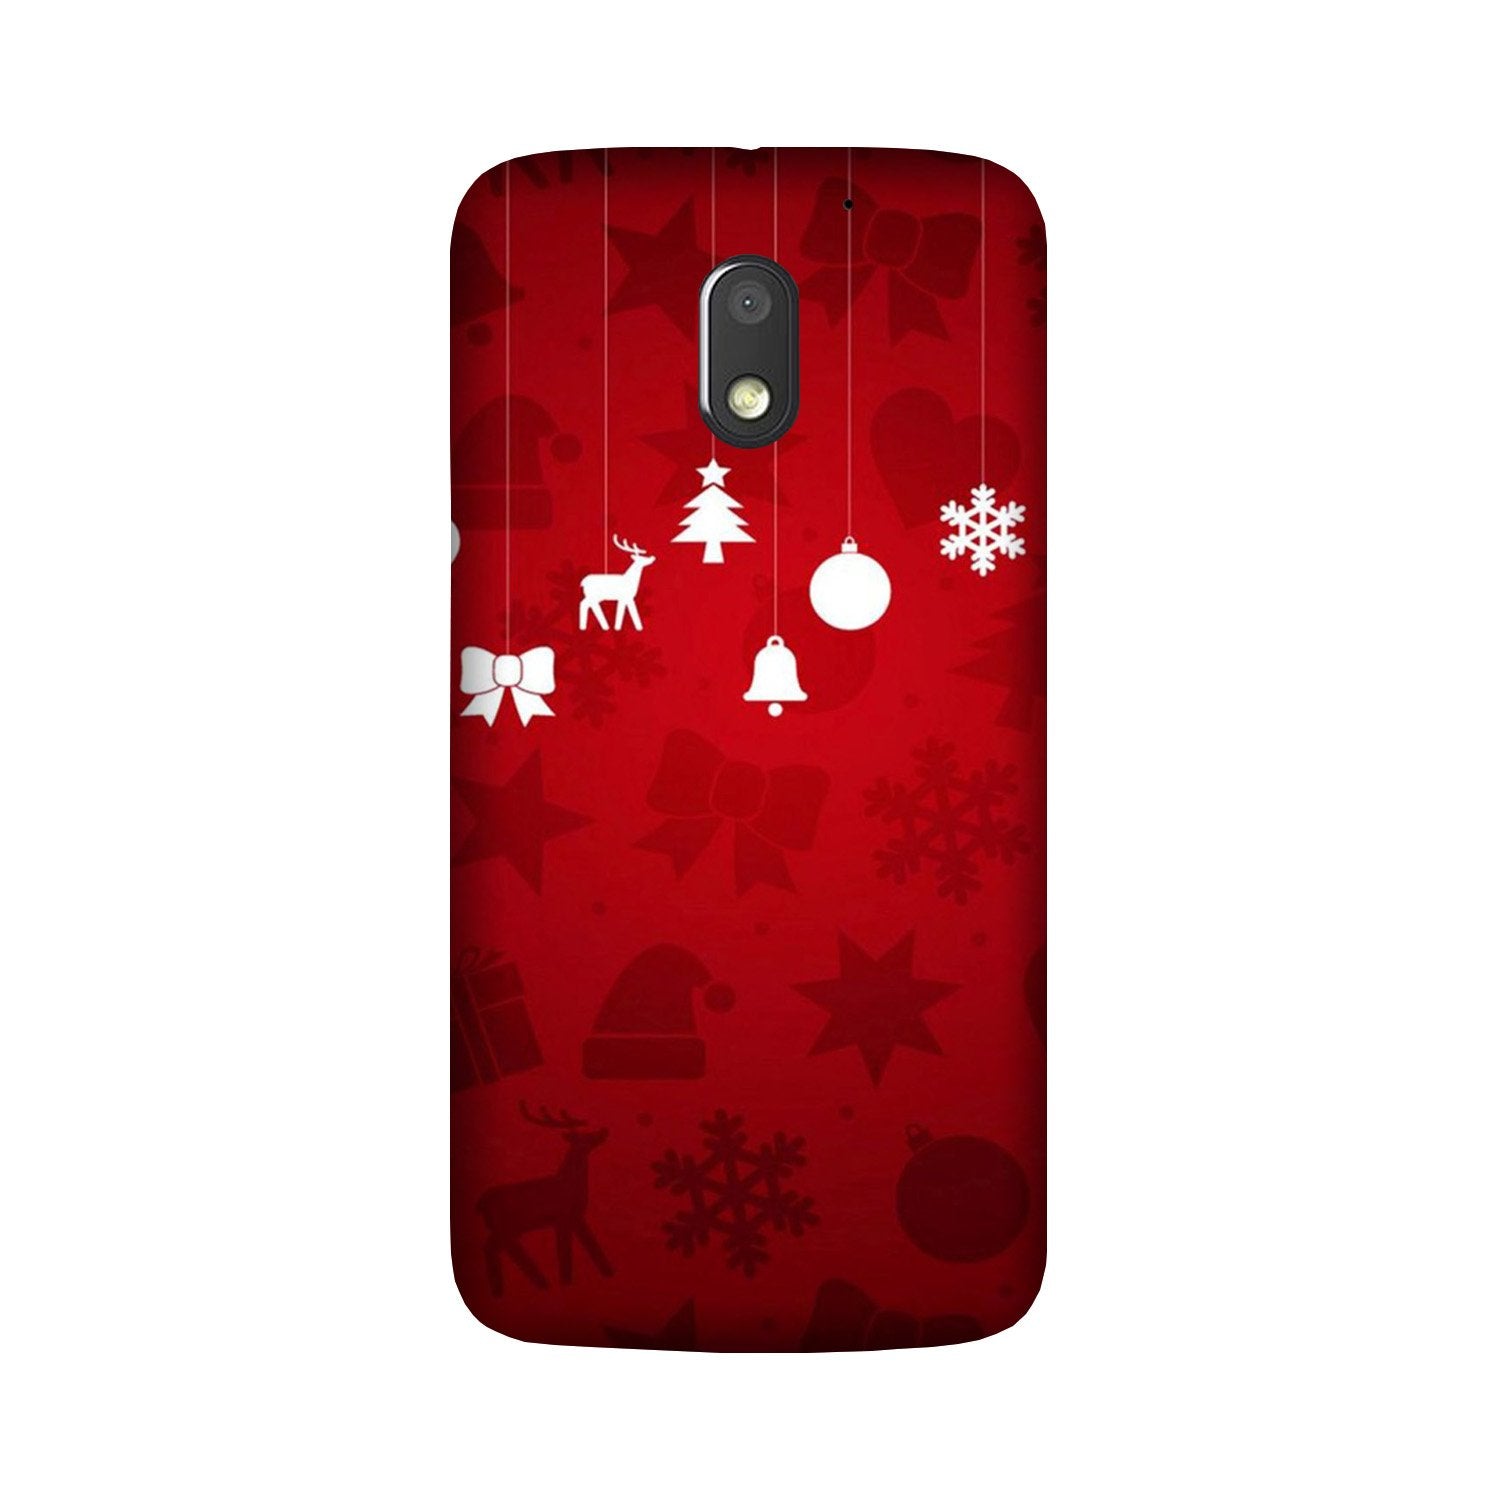 Christmas Case for Moto G4 Play